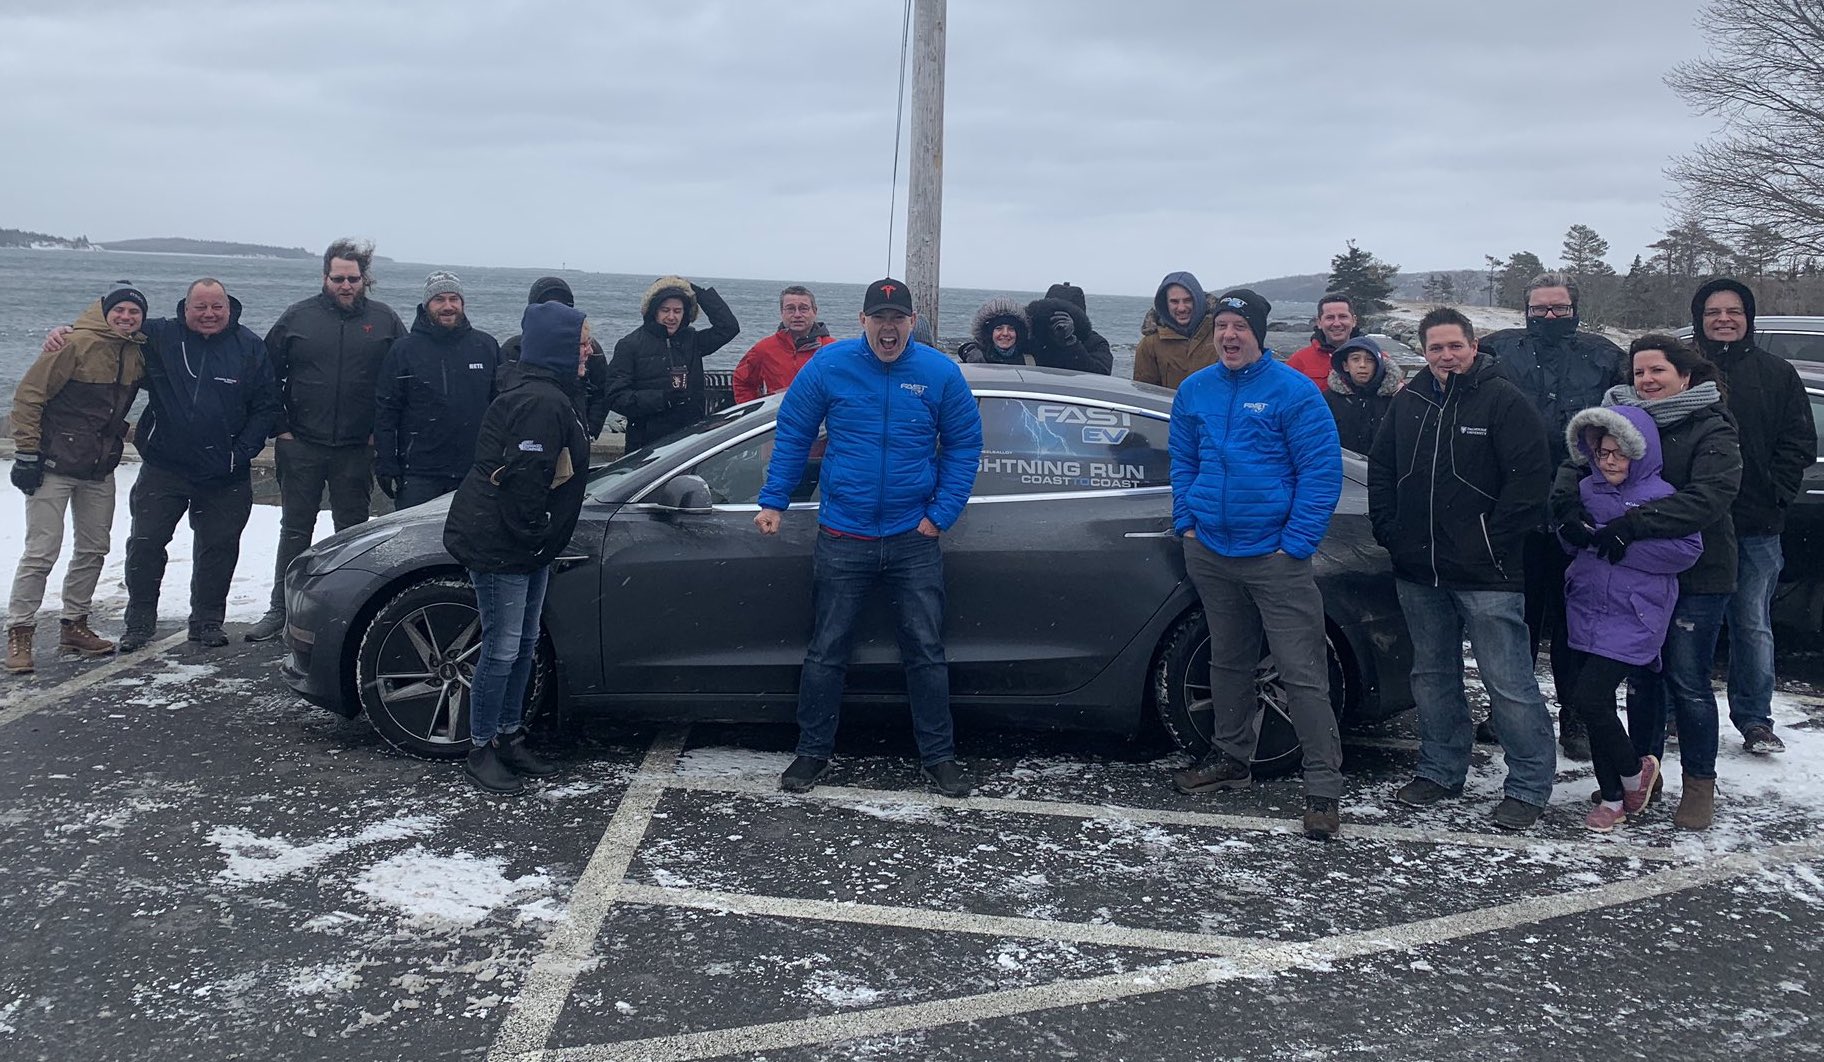 Tesla Model 3 Owners Make History With Coast-to-Coast Nonstop Canada EV Road Trip